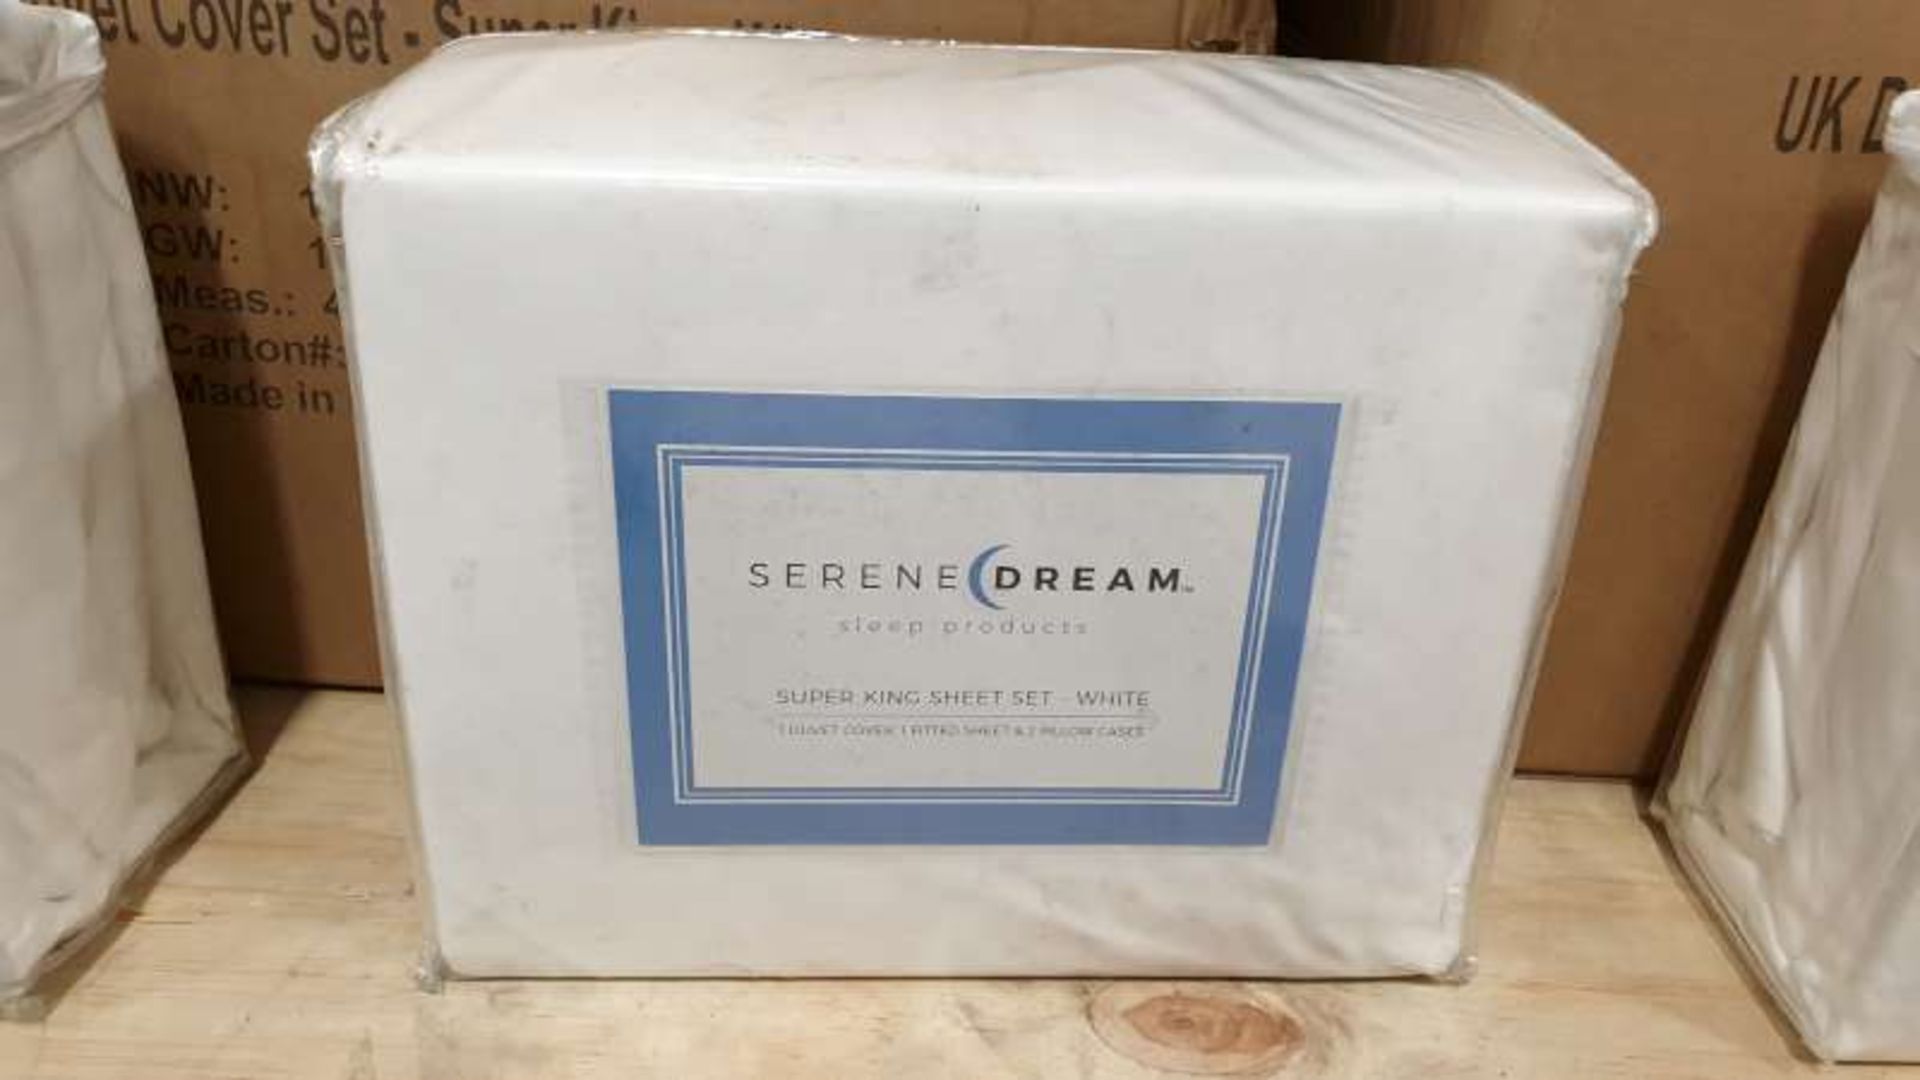 12 X WHITE COLOURED SERENE DREAMS SUPER KING SIZE DUVET SETS EACH SET CONTAINS DUVET COVER, FITTED